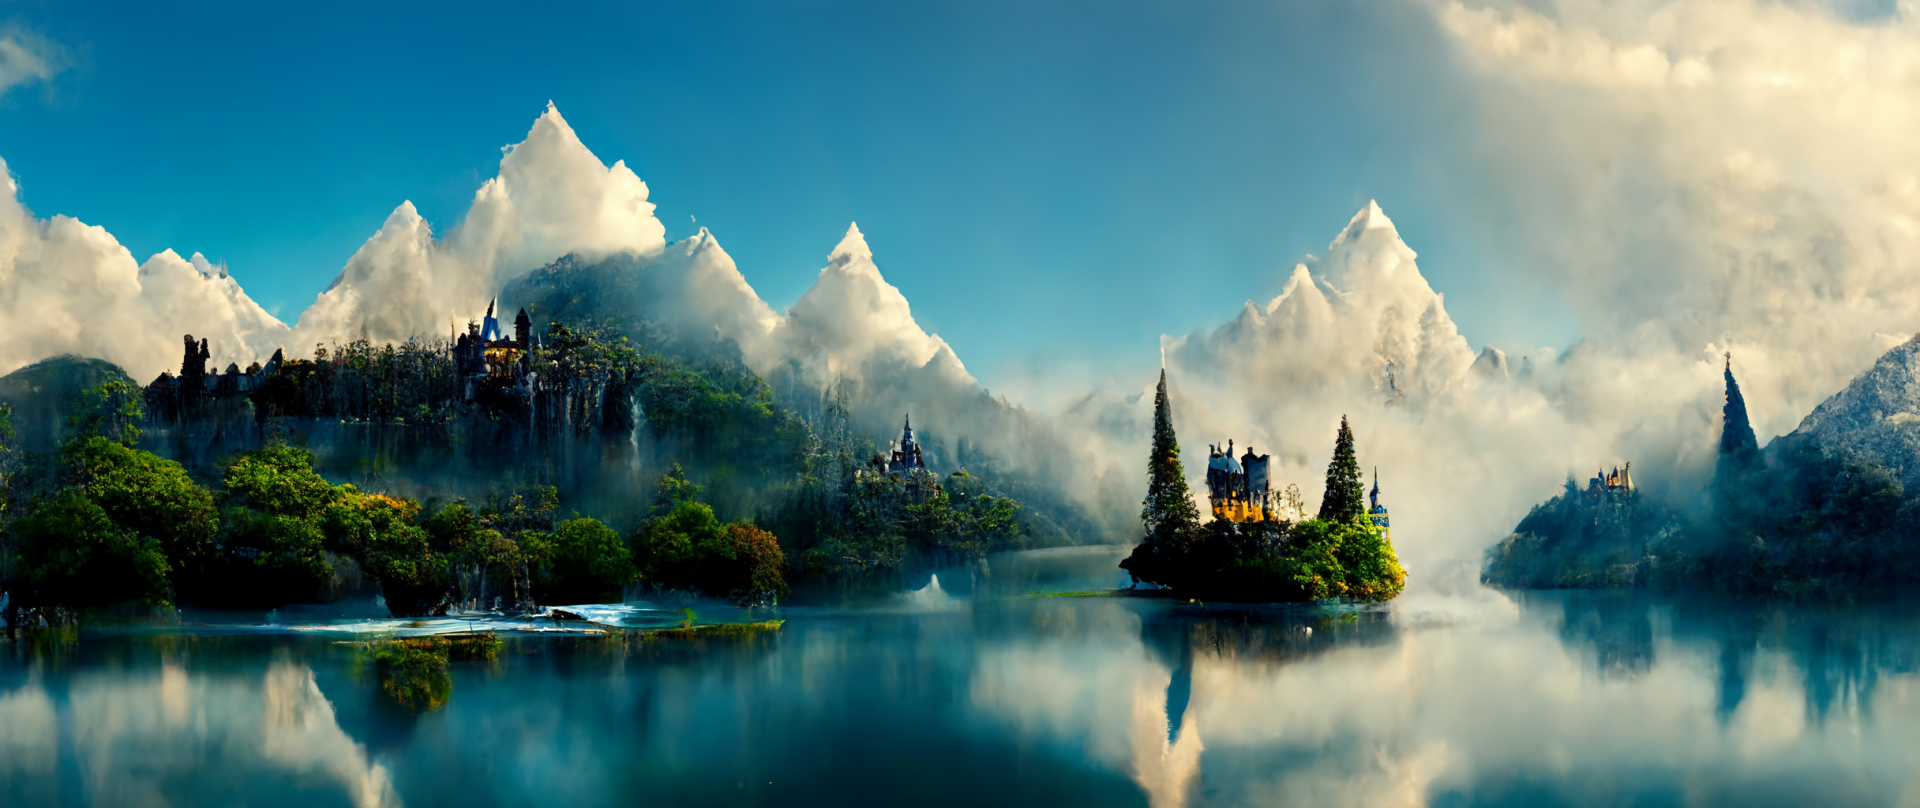 fc415323-06d9-4a50-80f5-55c7147a626b_S3RAPH_fantasy_kingdom._grean_trees_and_reflective_blue_lake._castle_towers._background_hills_and_waterfall.png